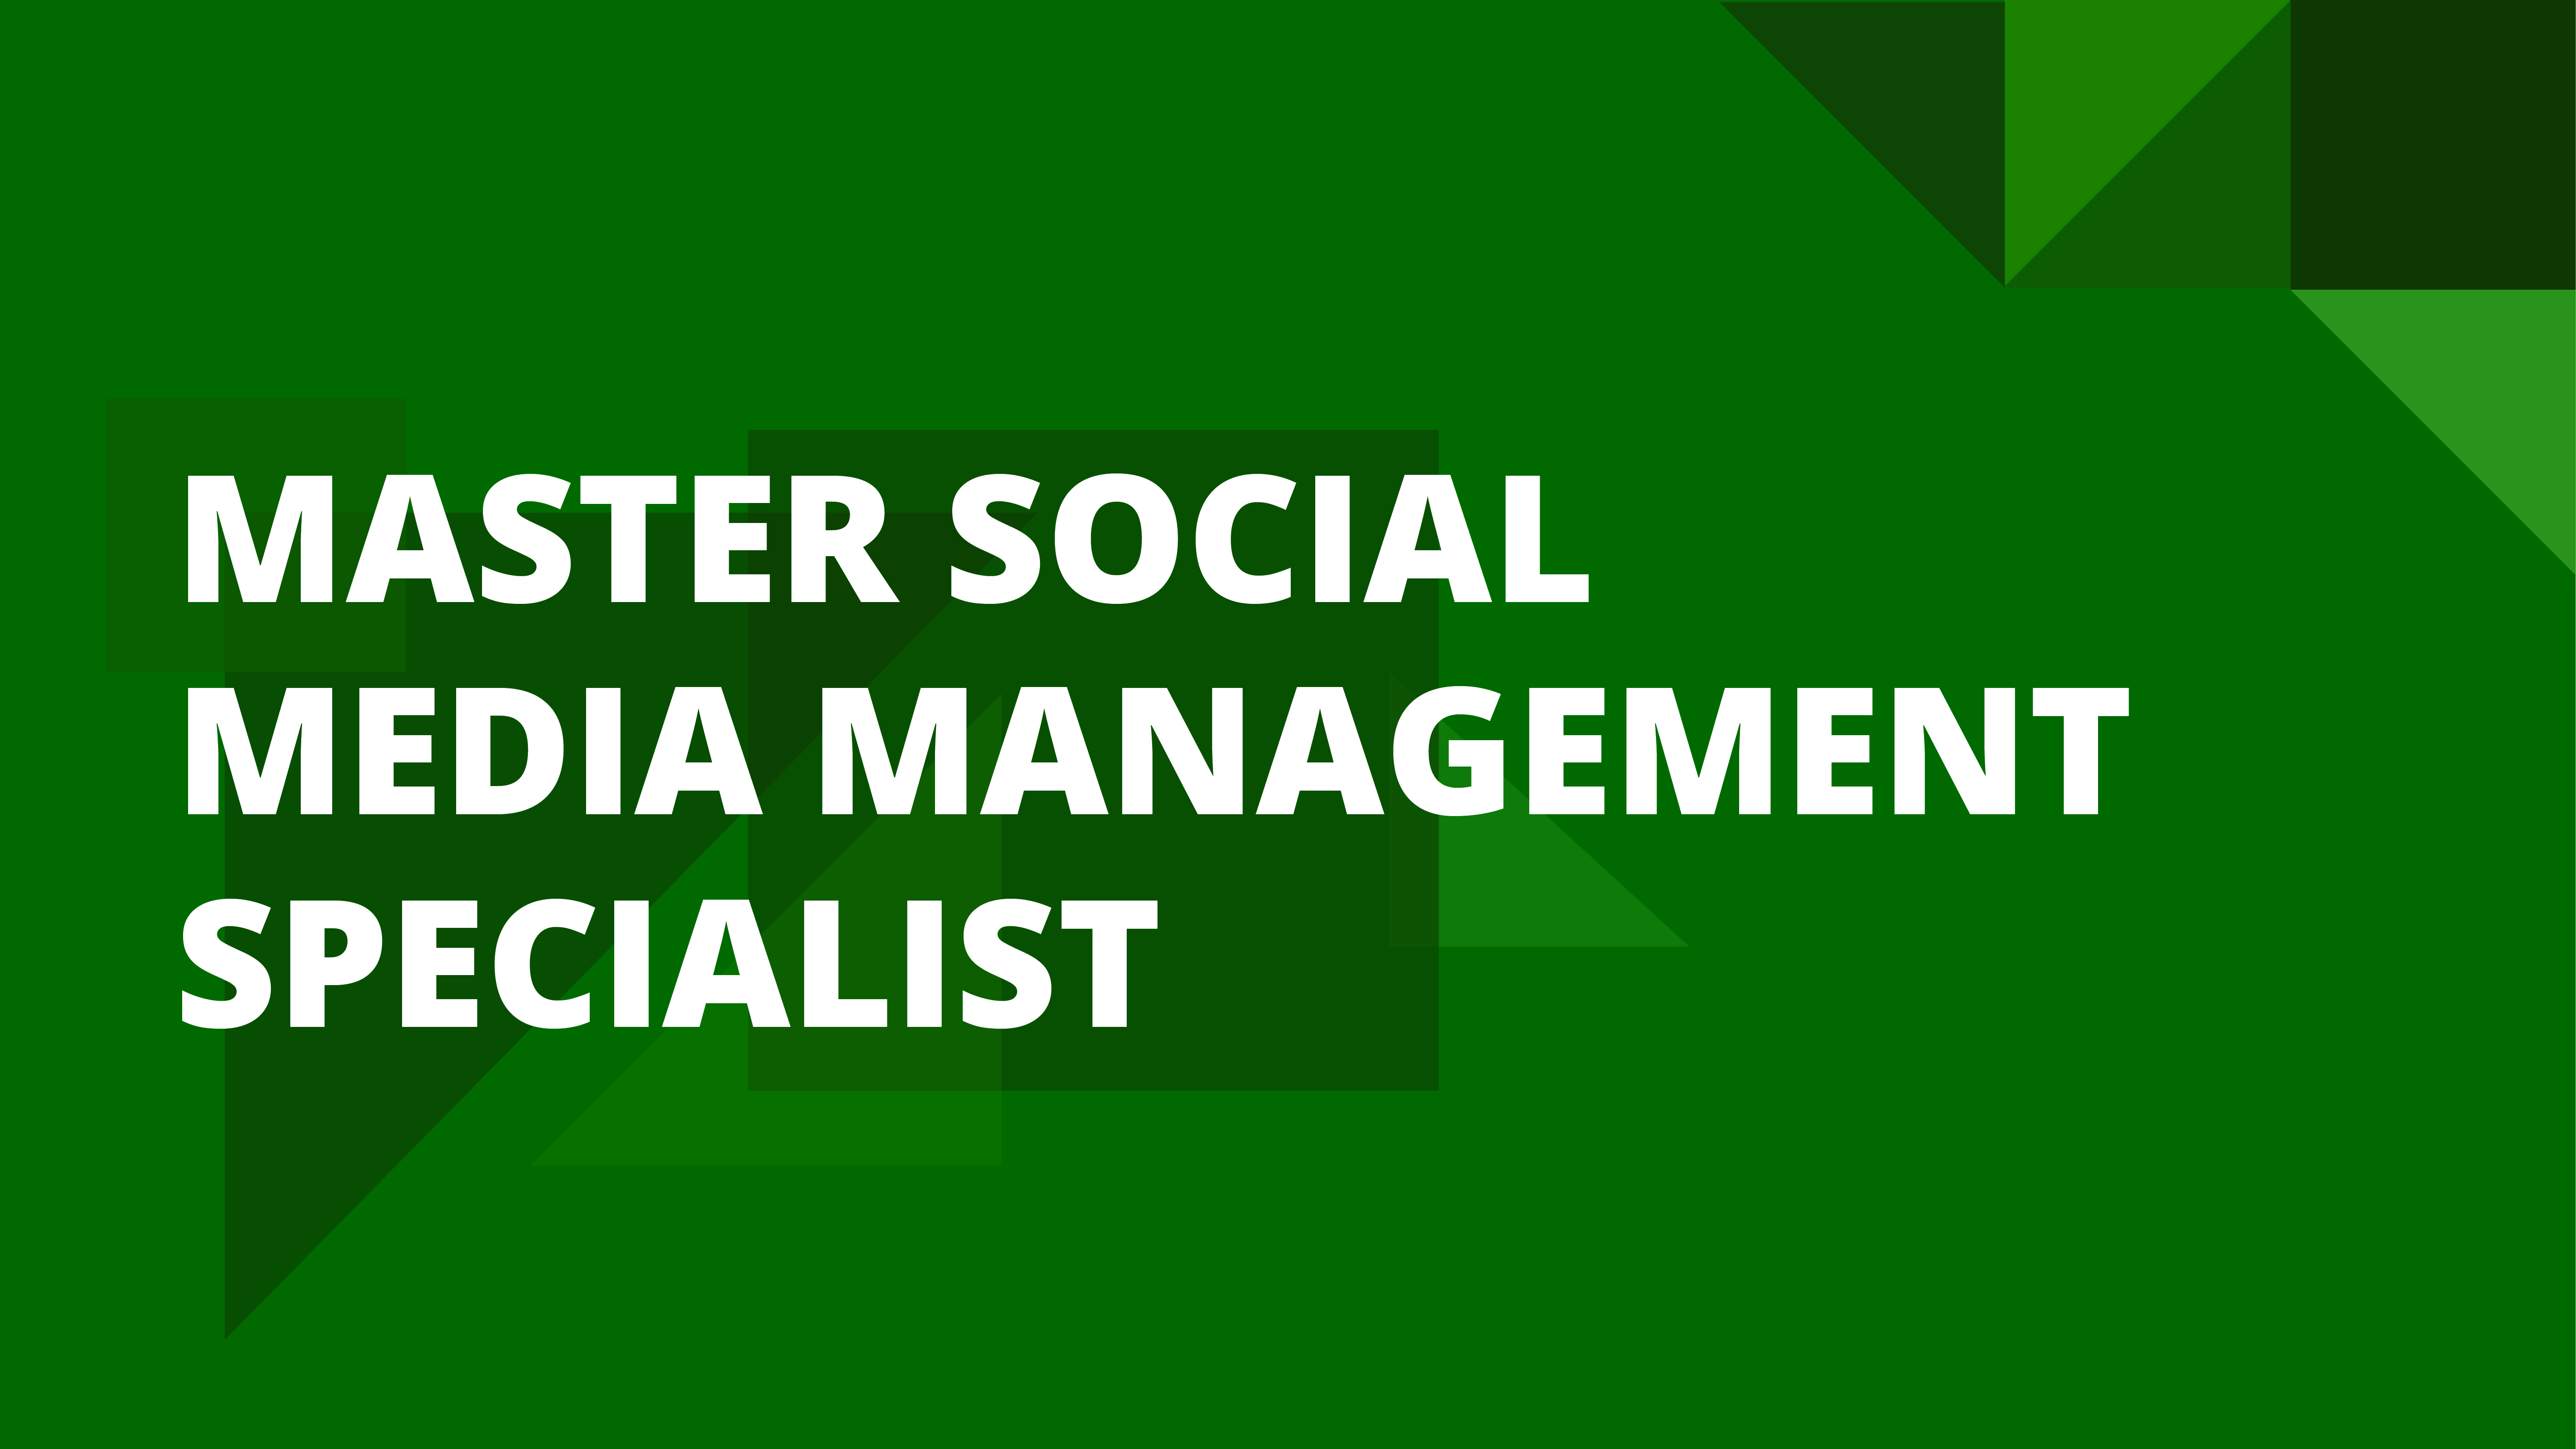 Corso-Online-Master-Social-Media-Management-Specialist-Life-Learning